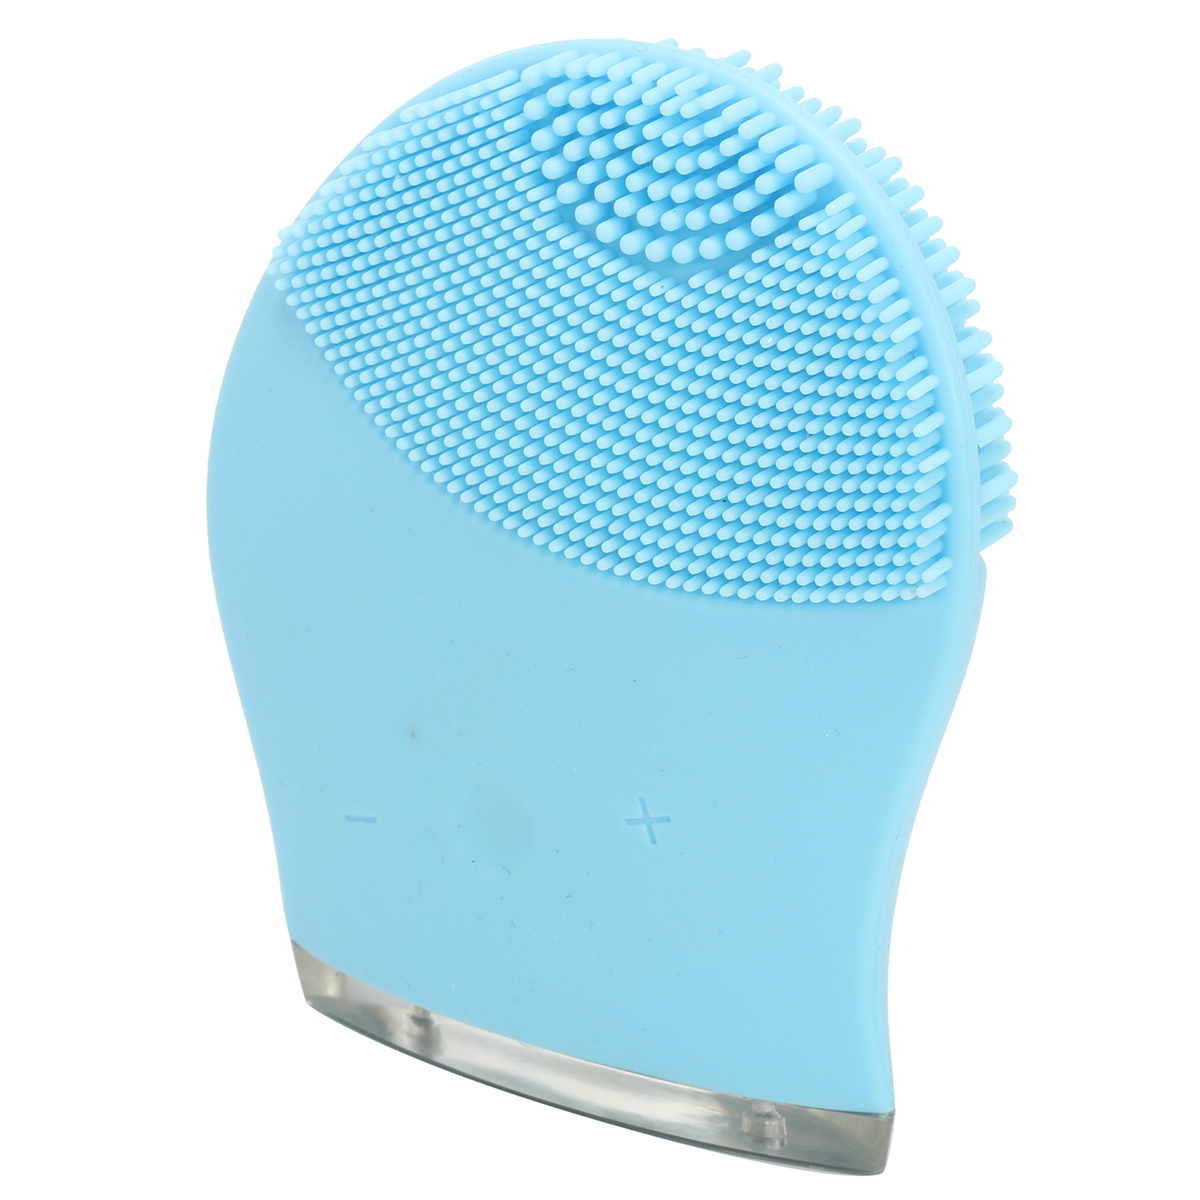 Rechargeable Facial Cleansing Brush Silicone Waterproof Face Massager Skin Tool